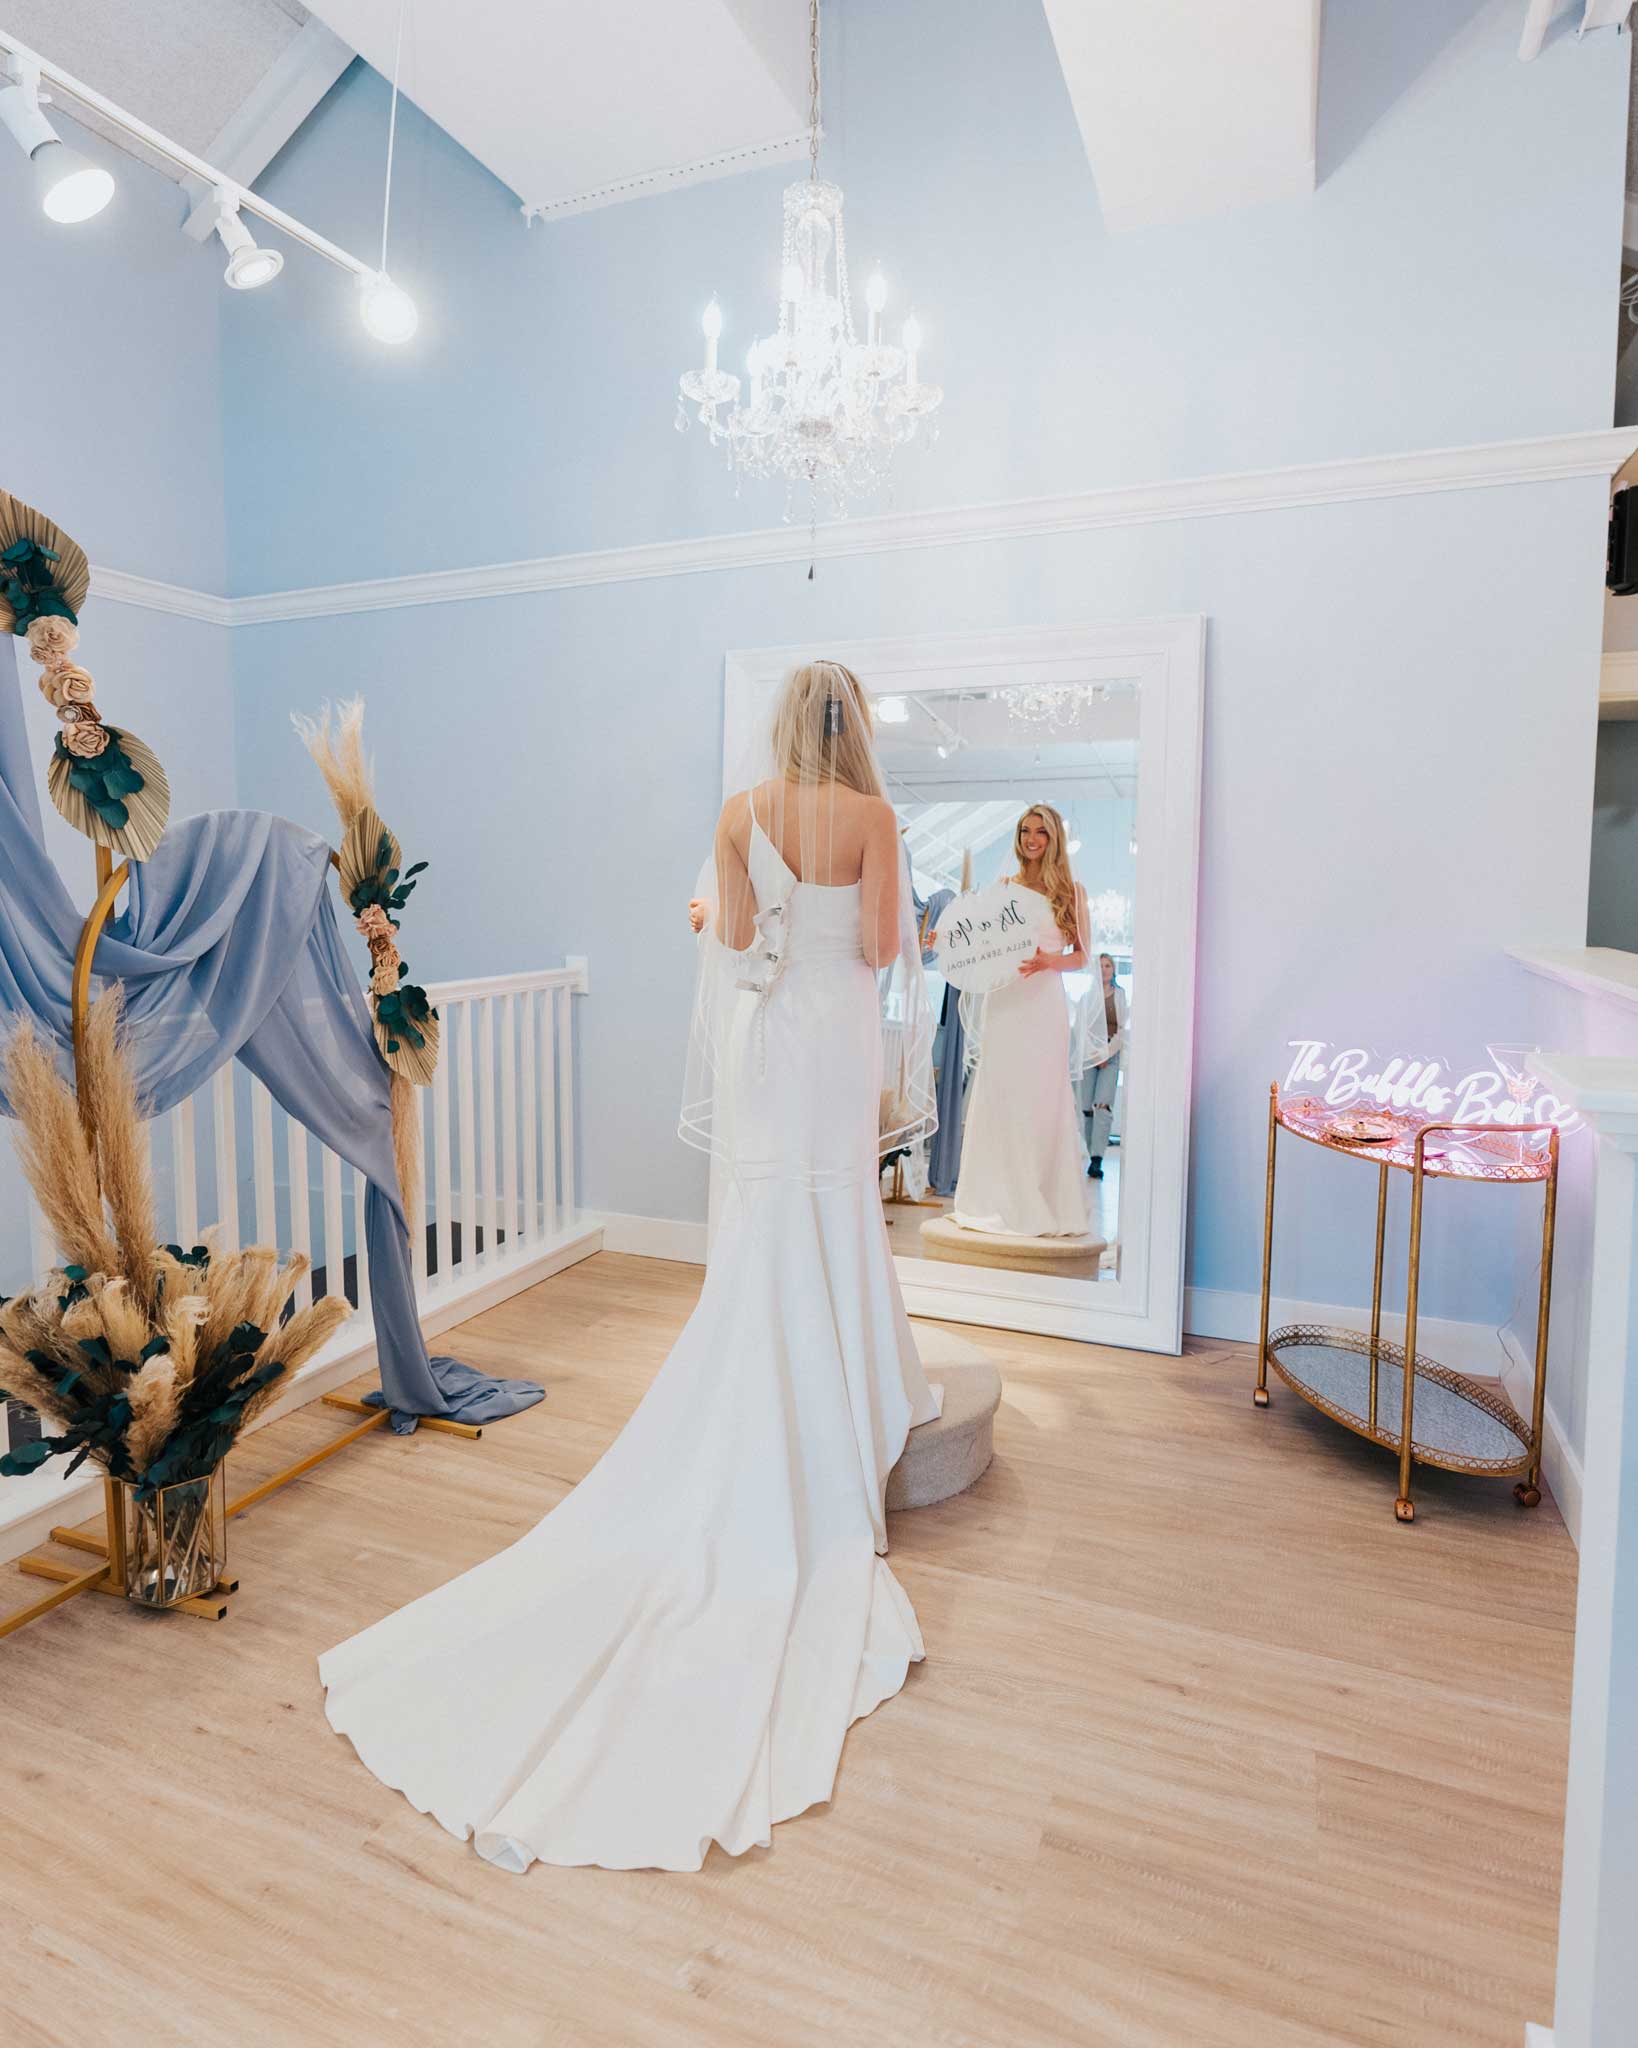 A bride in a wedding dress standing in front of a mirror at a bridal store.